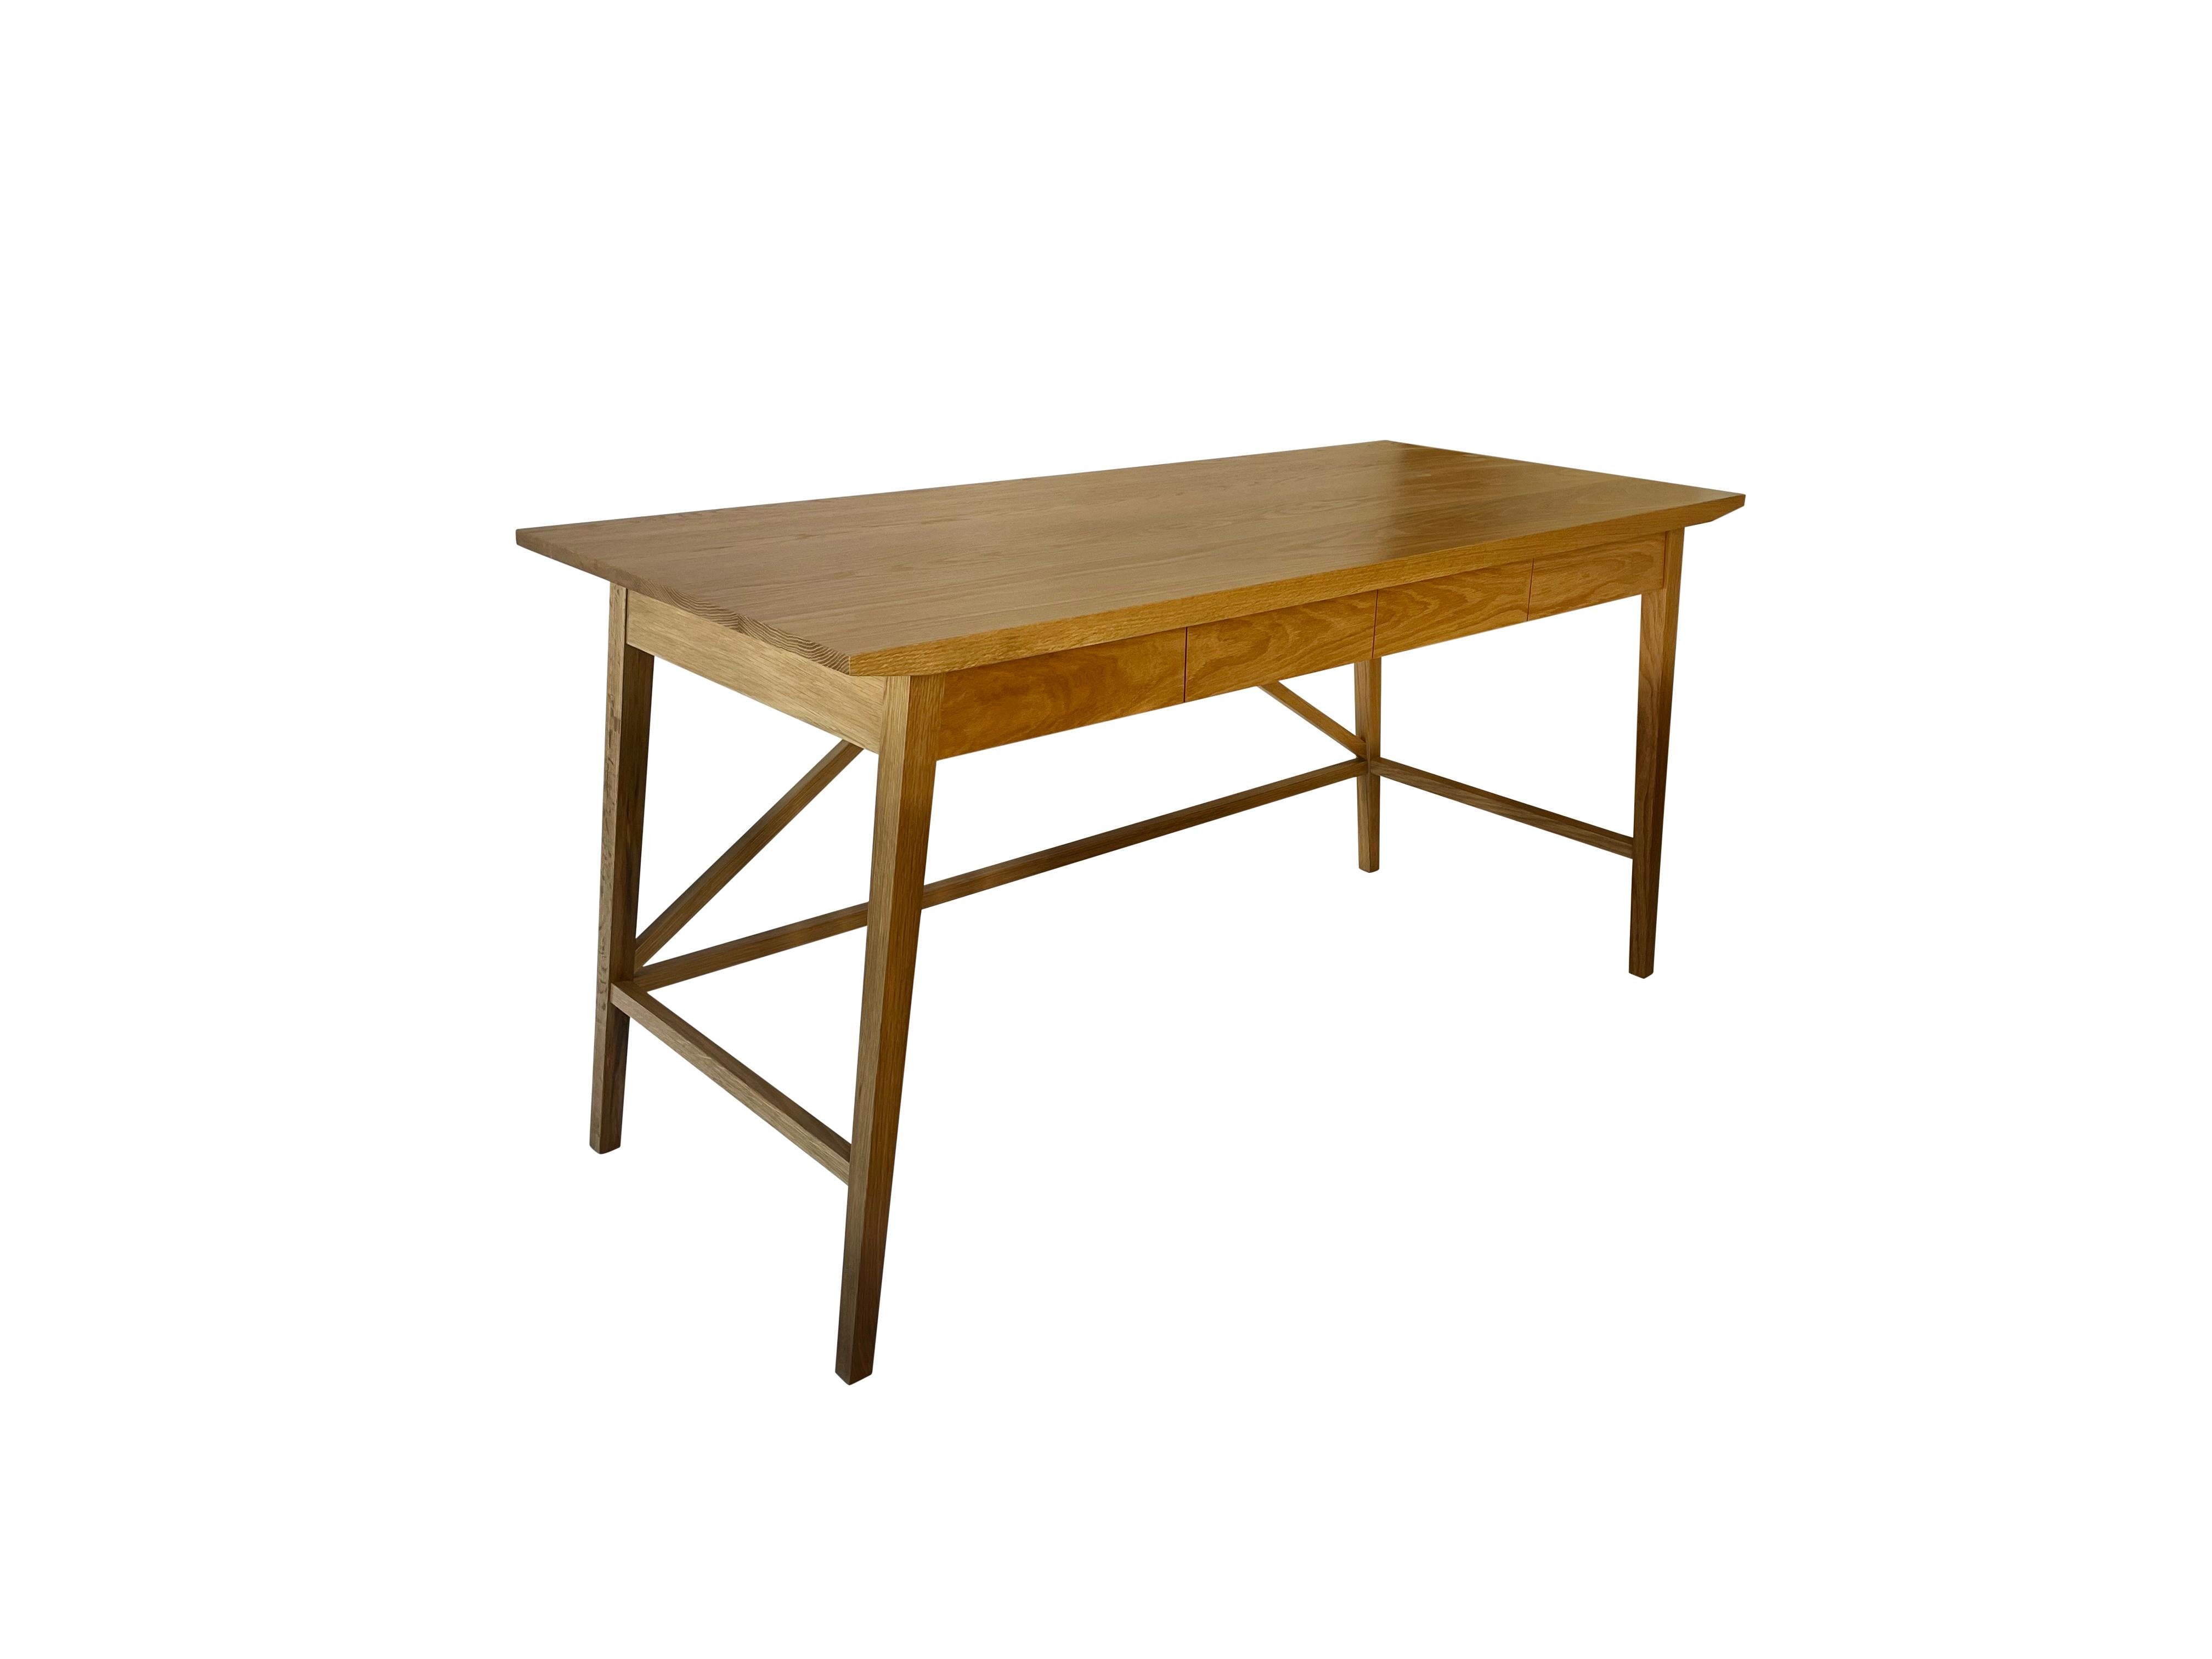 Hand-Crafted Contemporary Desk in White Oak with Pencil Drawers by Boyd & Allister For Sale